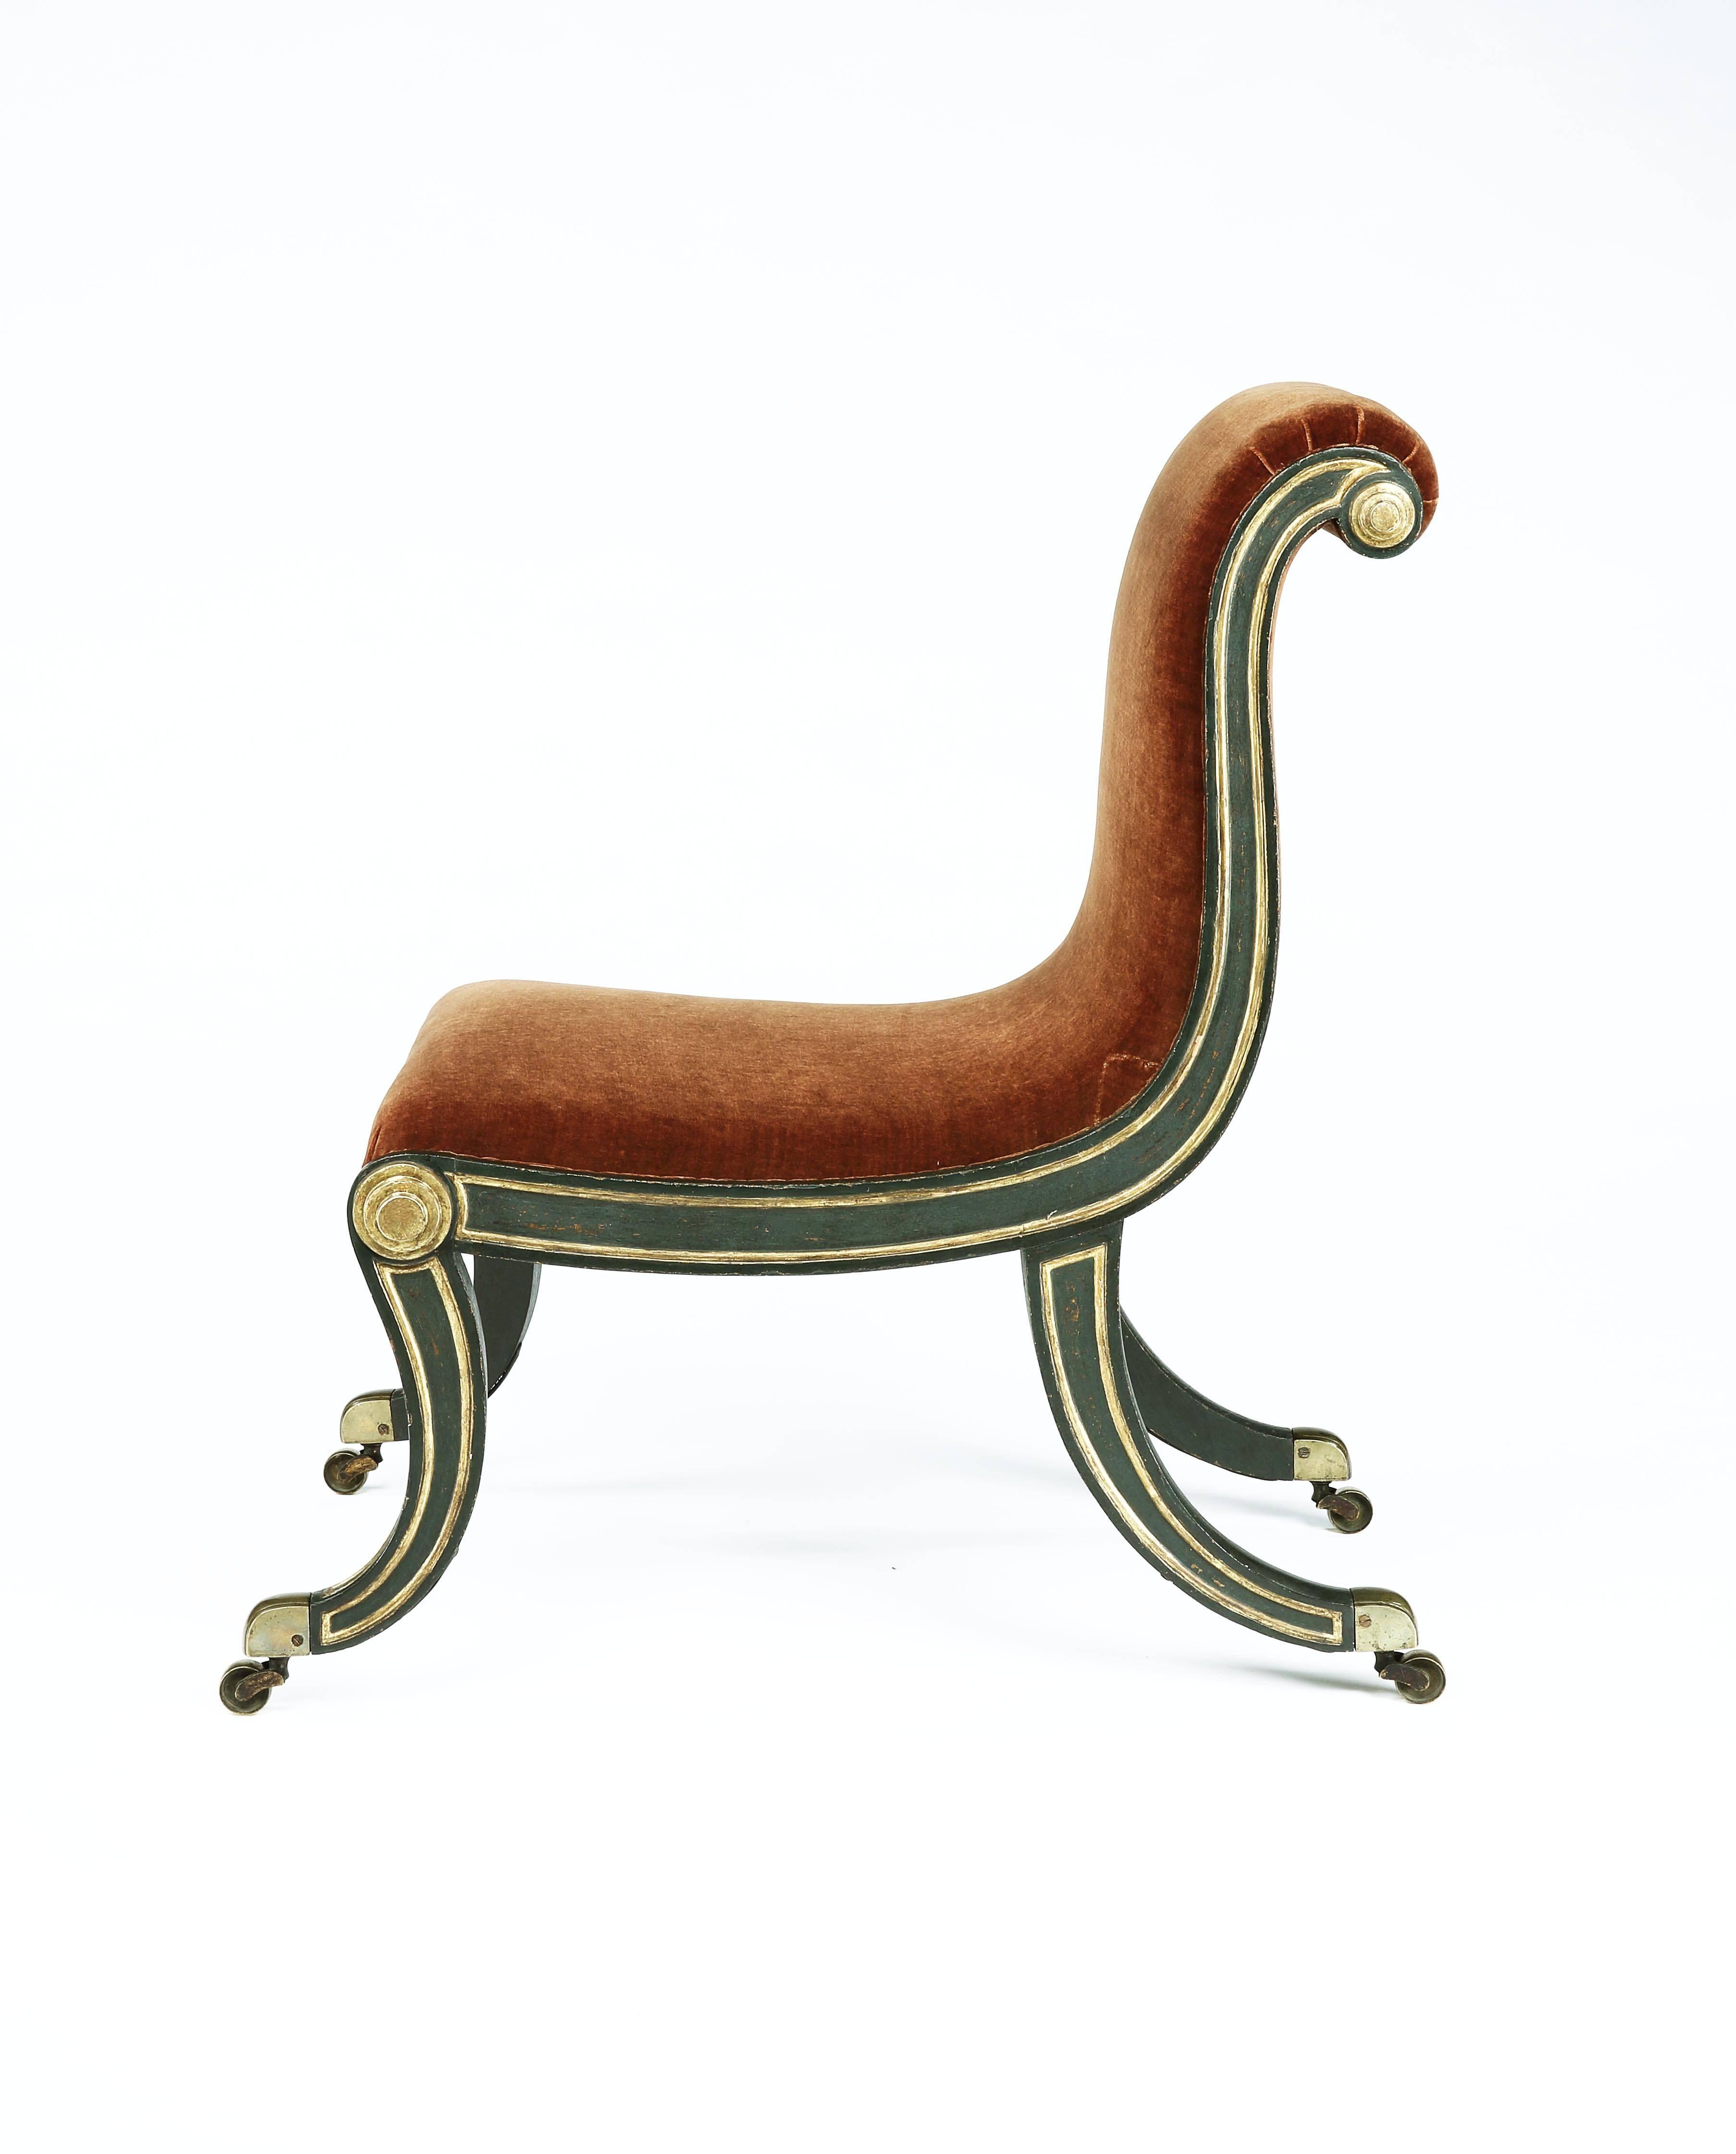 British Regency Side Chair in the Manner of Thomas Hope